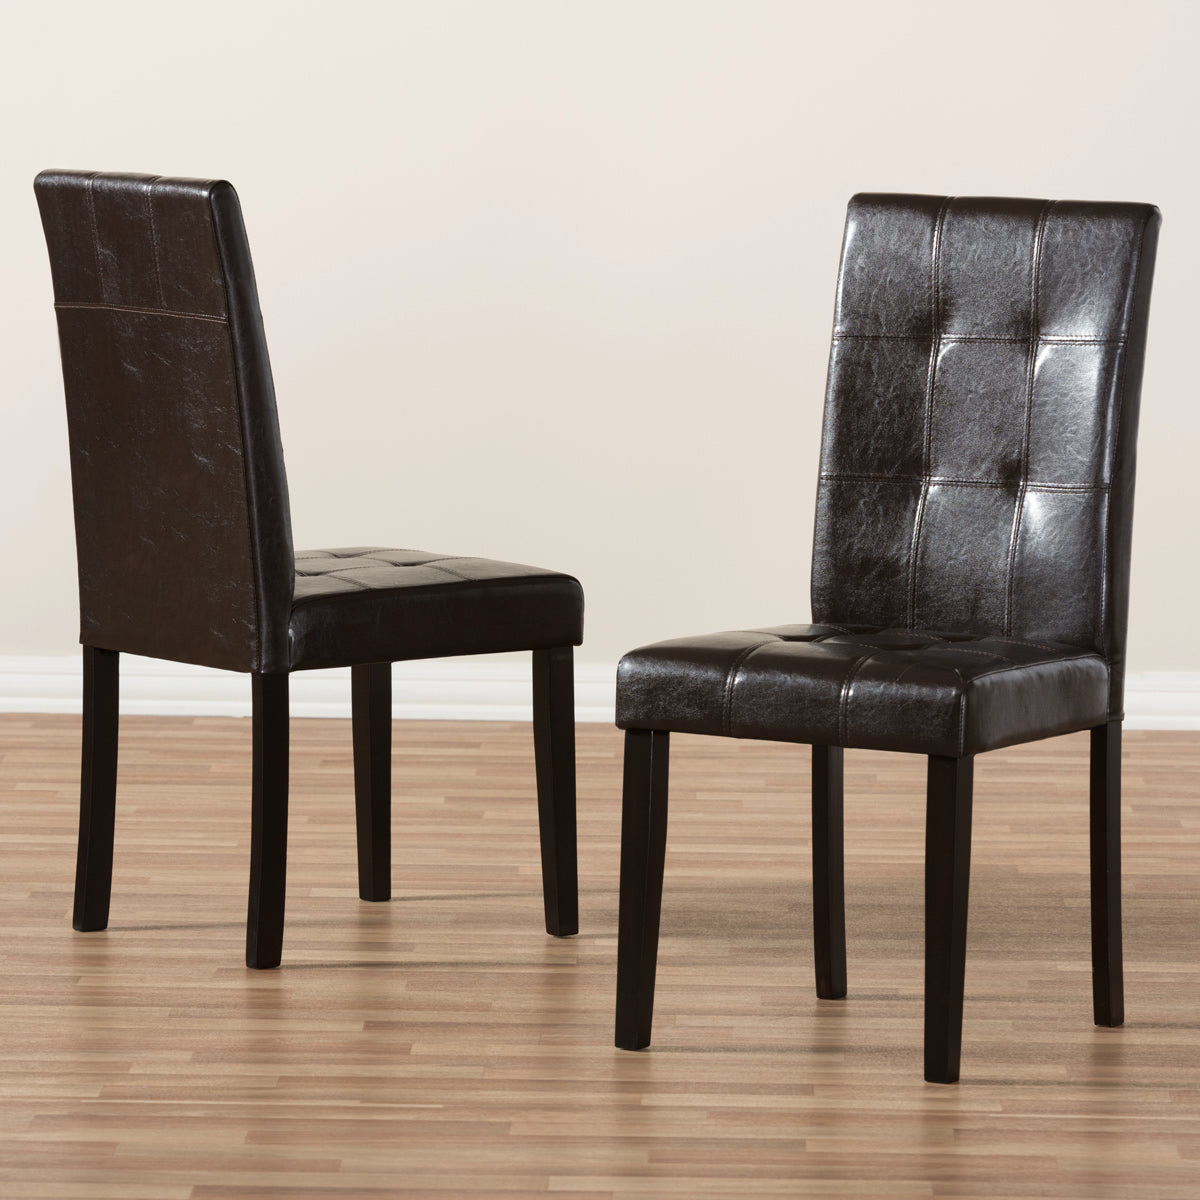 Baxton Studio Avery Modern and Contemporary Dark Brown Faux Leather Upholstered Dining Chair (Set of 2) Baxton Studio-dining chair-Minimal And Modern - 6